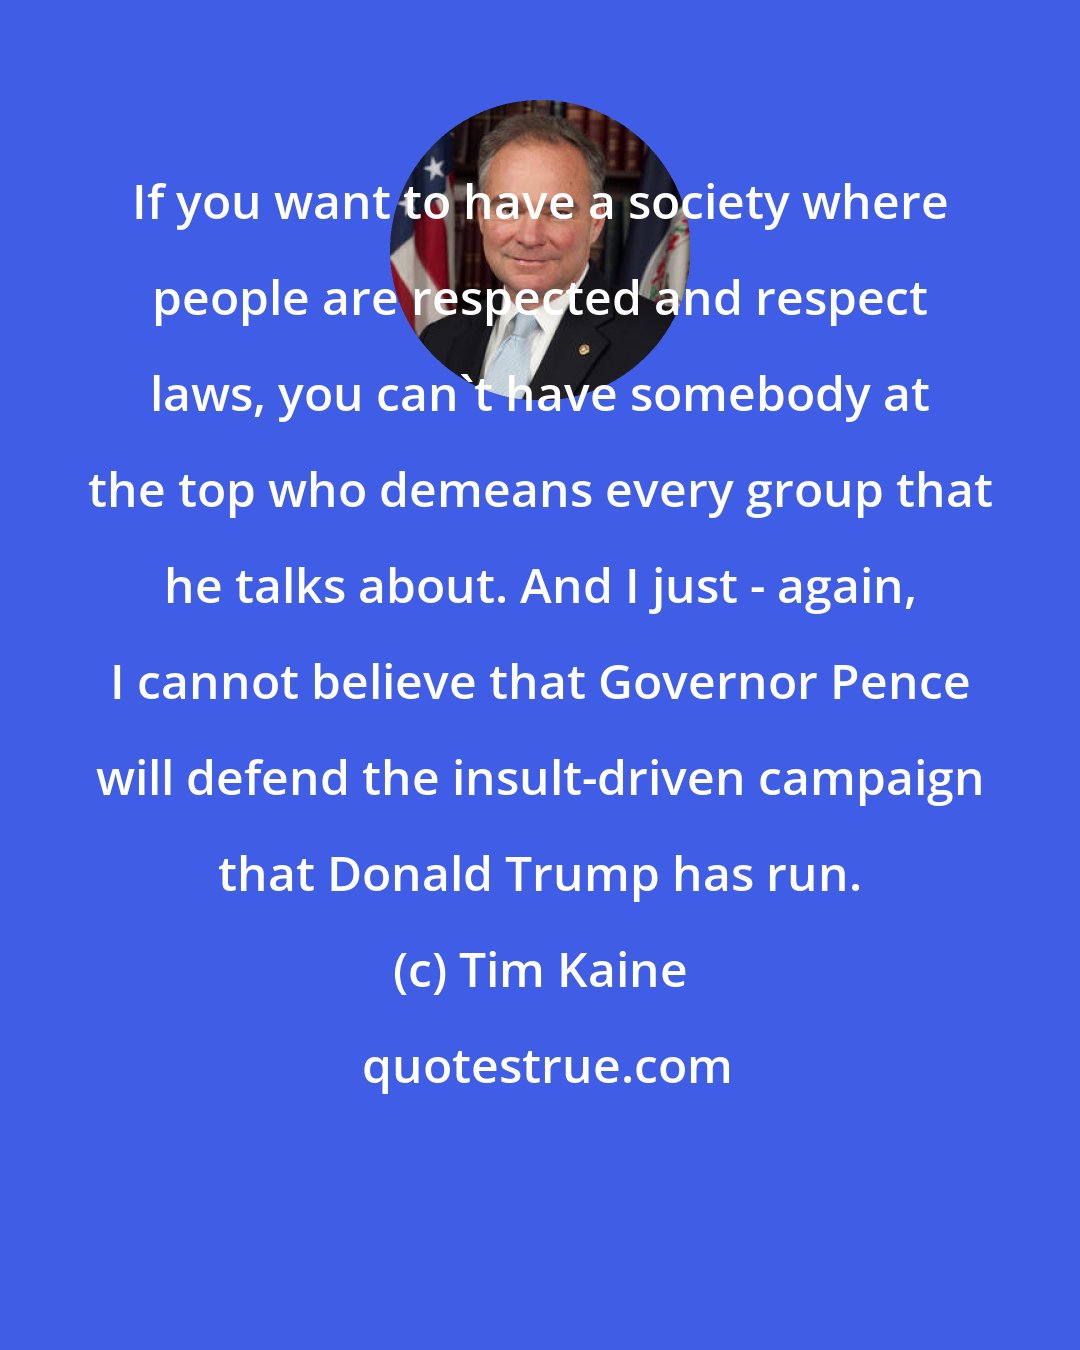 Tim Kaine: If you want to have a society where people are respected and respect laws, you can't have somebody at the top who demeans every group that he talks about. And I just - again, I cannot believe that Governor Pence will defend the insult-driven campaign that Donald Trump has run.